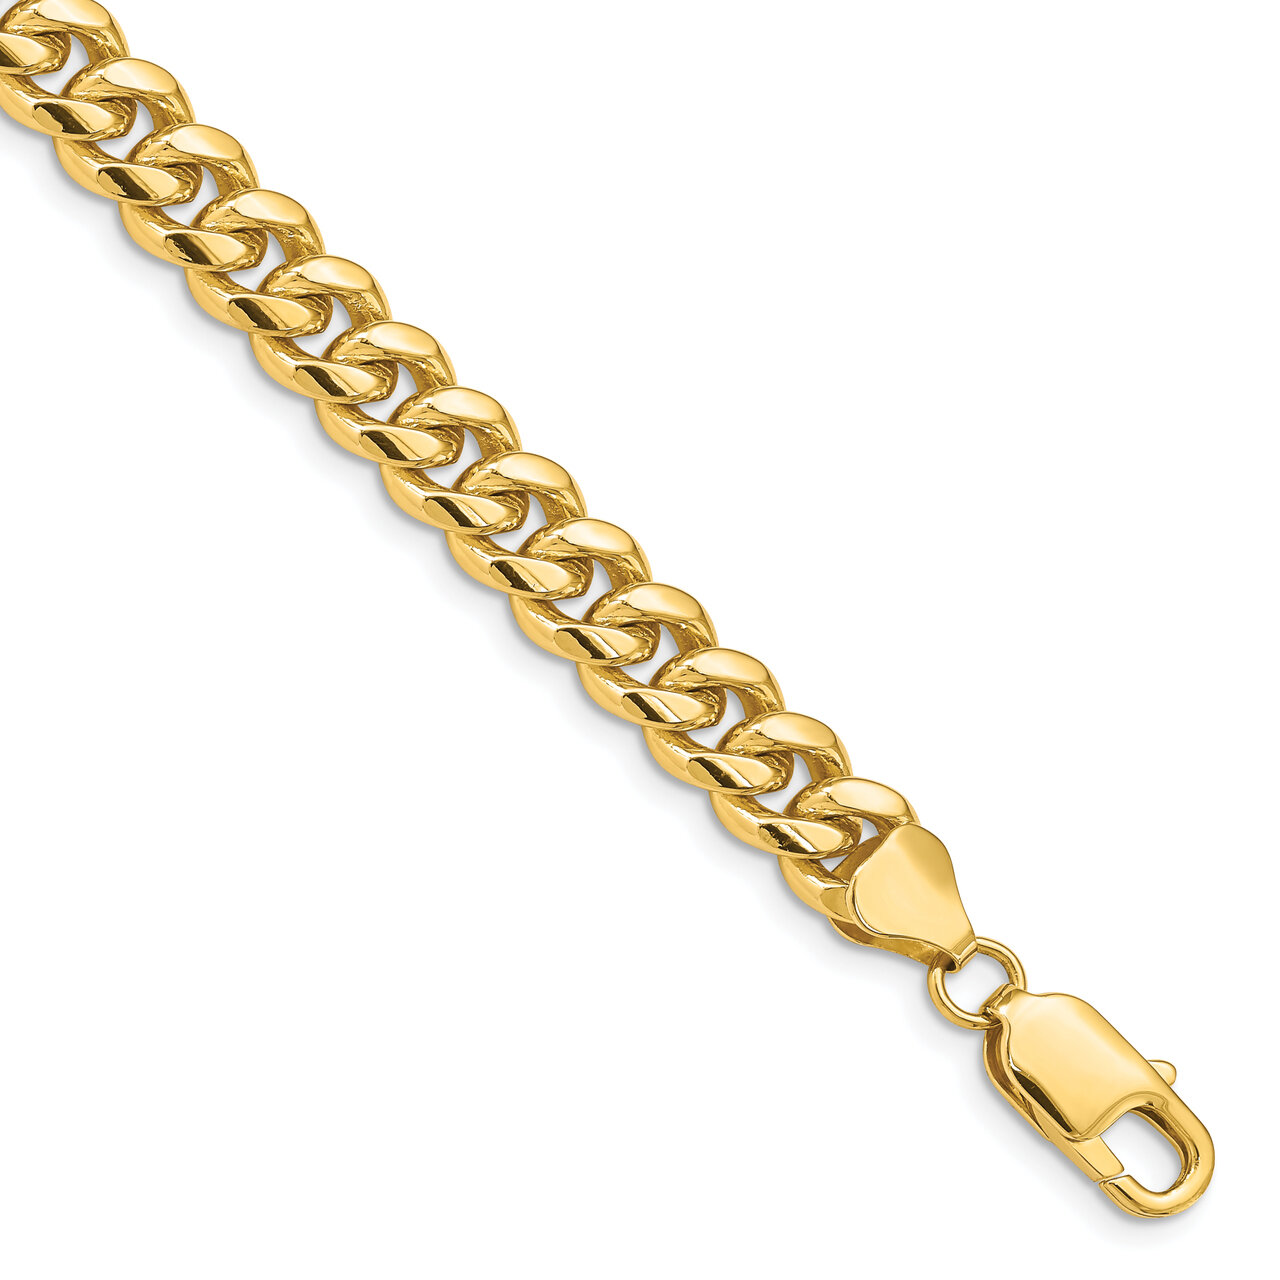 8.5 Inch 6.75mm Solid Miami Cuban Chain 14k Yellow Gold DCU220-8.5